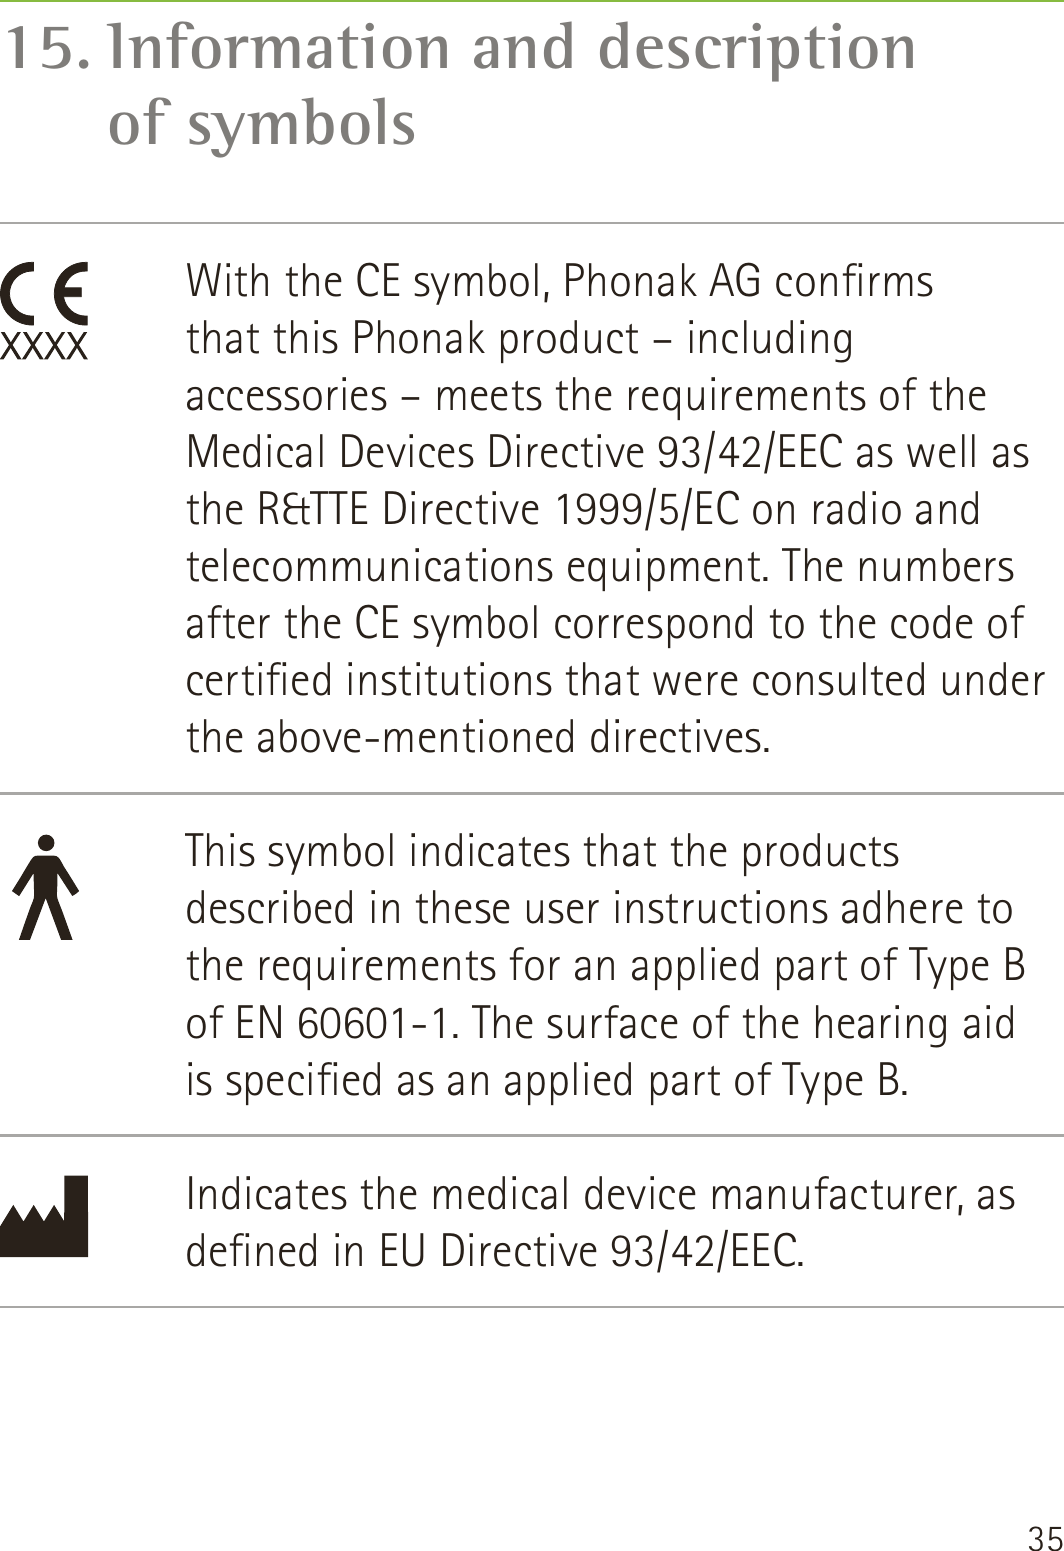 35With the CE symbol, Phonak AG conrms  that this Phonak product – including accessories – meets the requirements of the Medical Devices Directive 93/42/EEC as well as the R&amp;TTE Directive 1999/5/EC on radio and telecommunications equipment. The numbers after the CE symbol correspond to the code of certied institutions that were consulted under the above-mentioned directives.This symbol indicates that the products described in these user instructions adhere to the requirements for an applied part of Type B of EN 60601-1. The surface of the hearing aid  is specied as an applied part of Type B.Indicates the medical device manufacturer, as dened in EU Directive 93/42/EEC.15. Information and description  of symbols